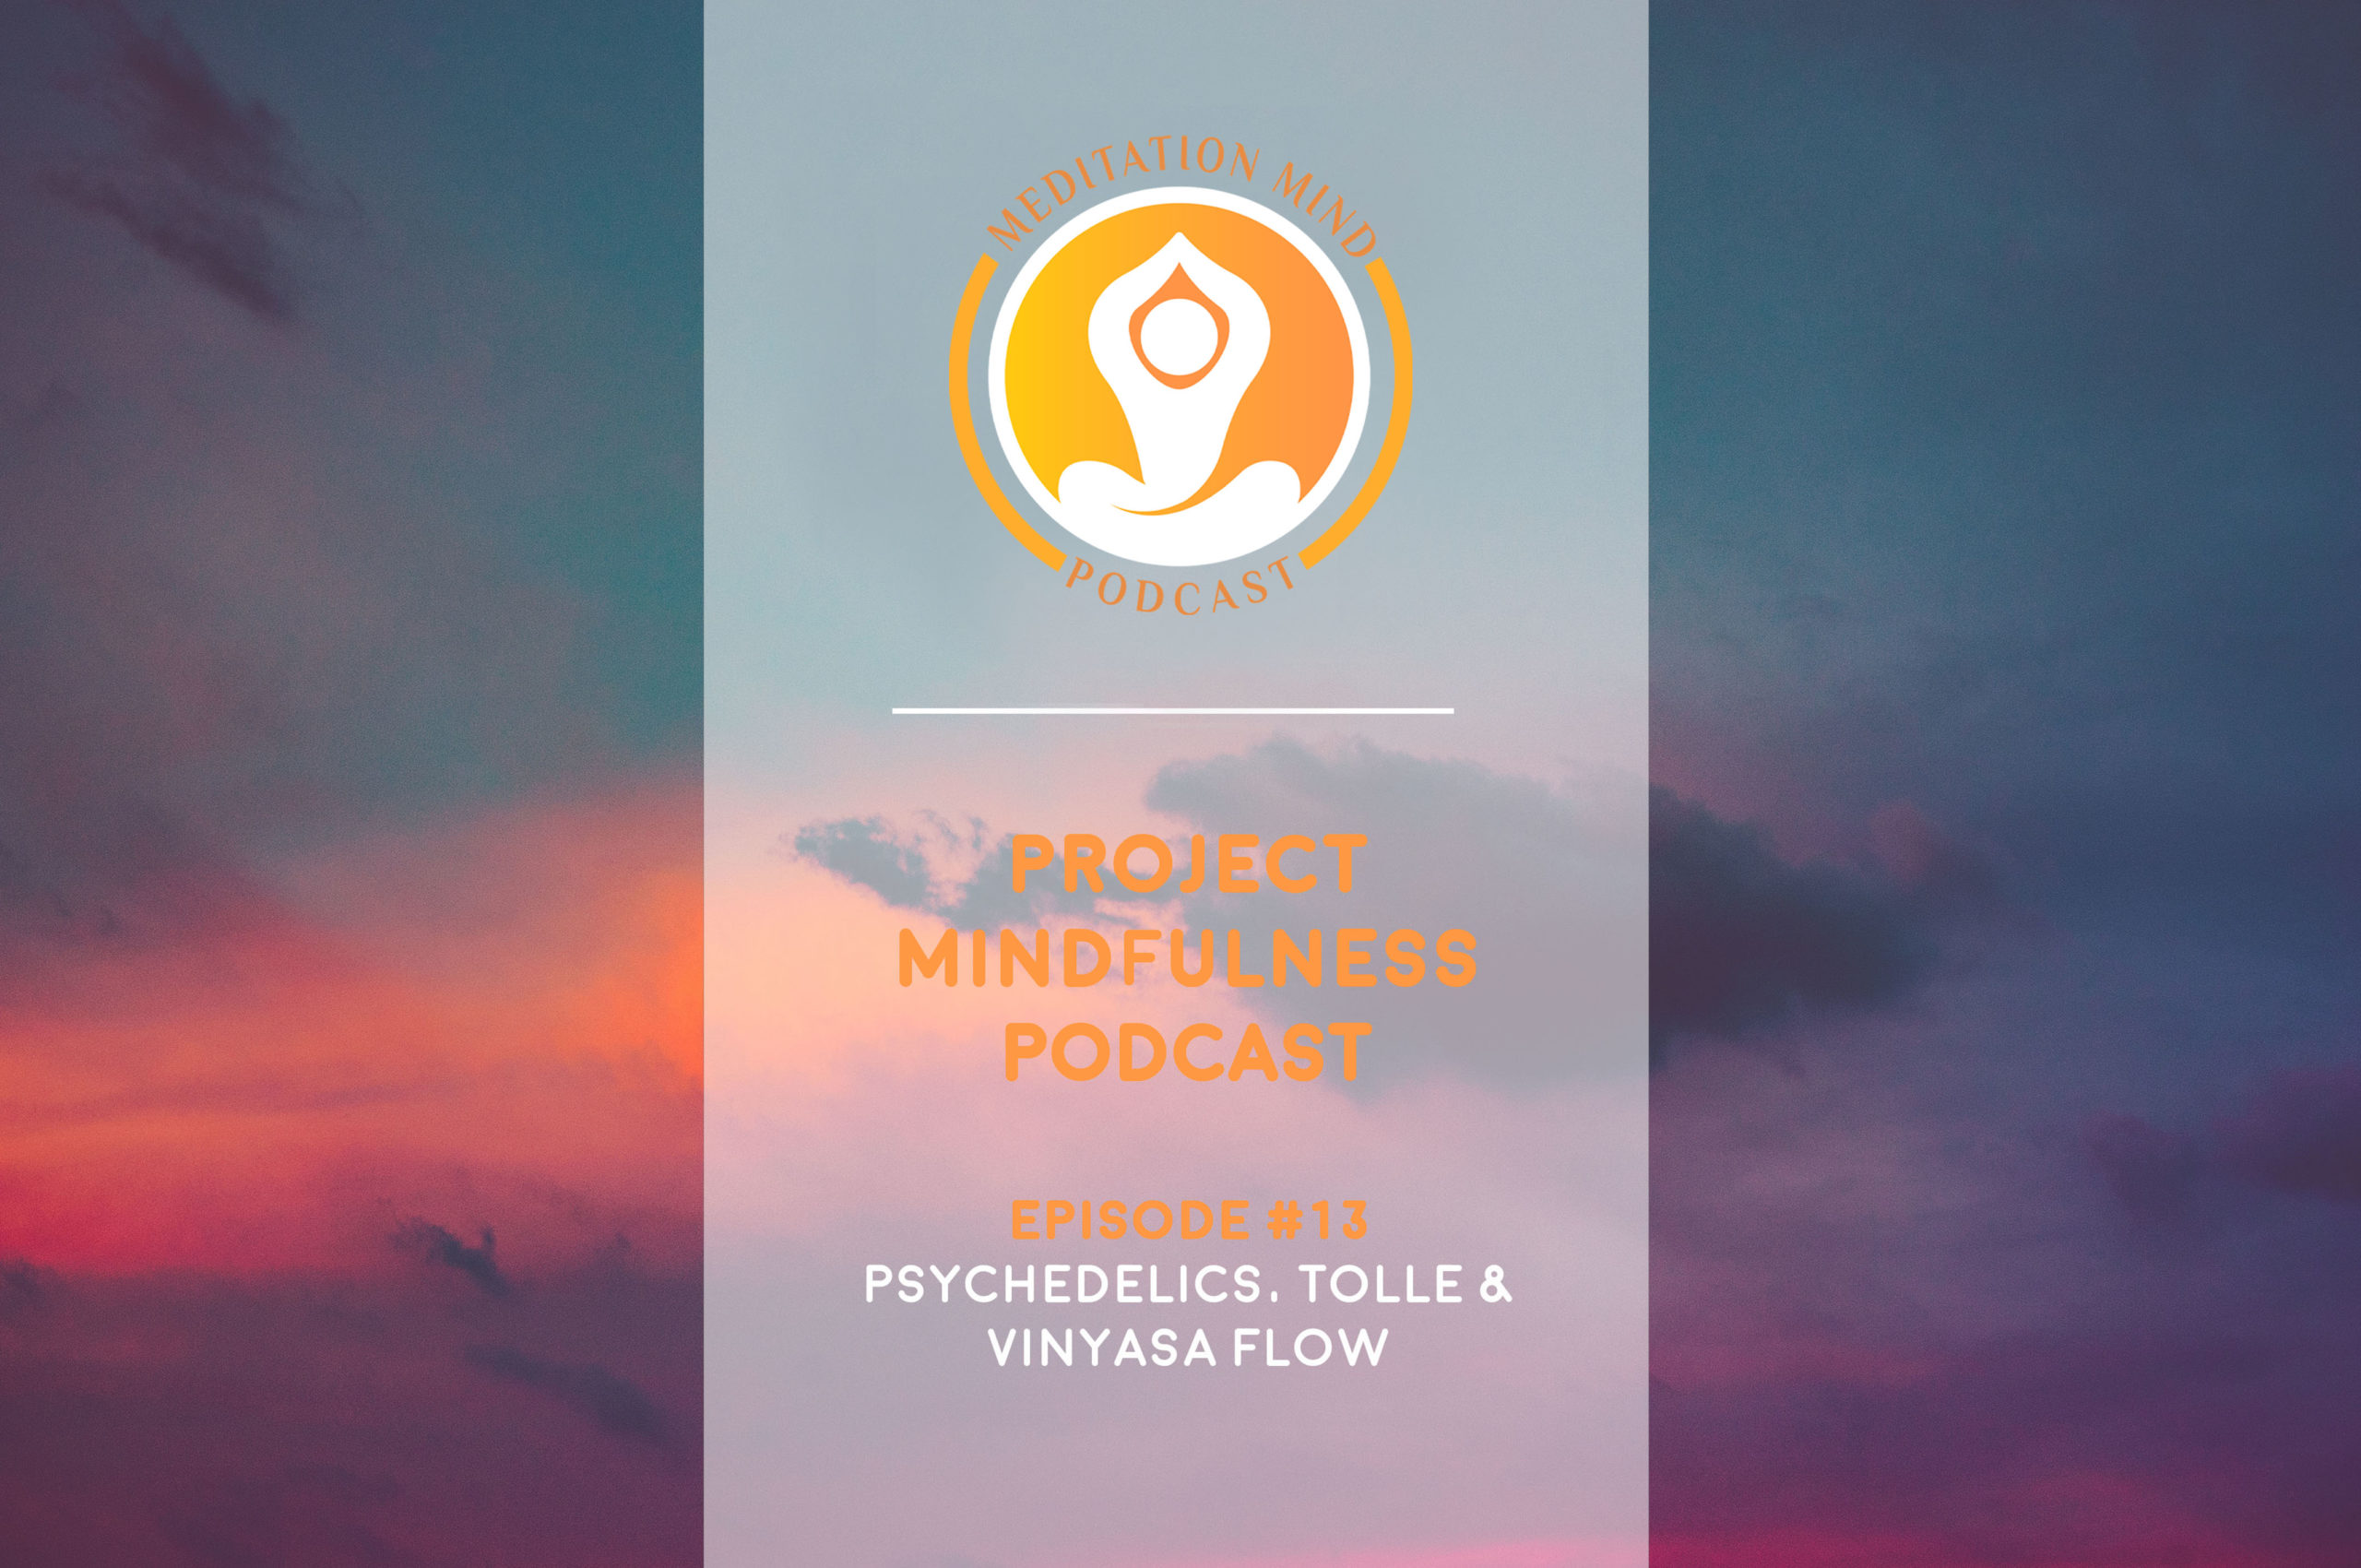 We talk about the use of psychedelics for discovering ourselves, the impact of Eckhart Tolle and Vinyasa Yoga